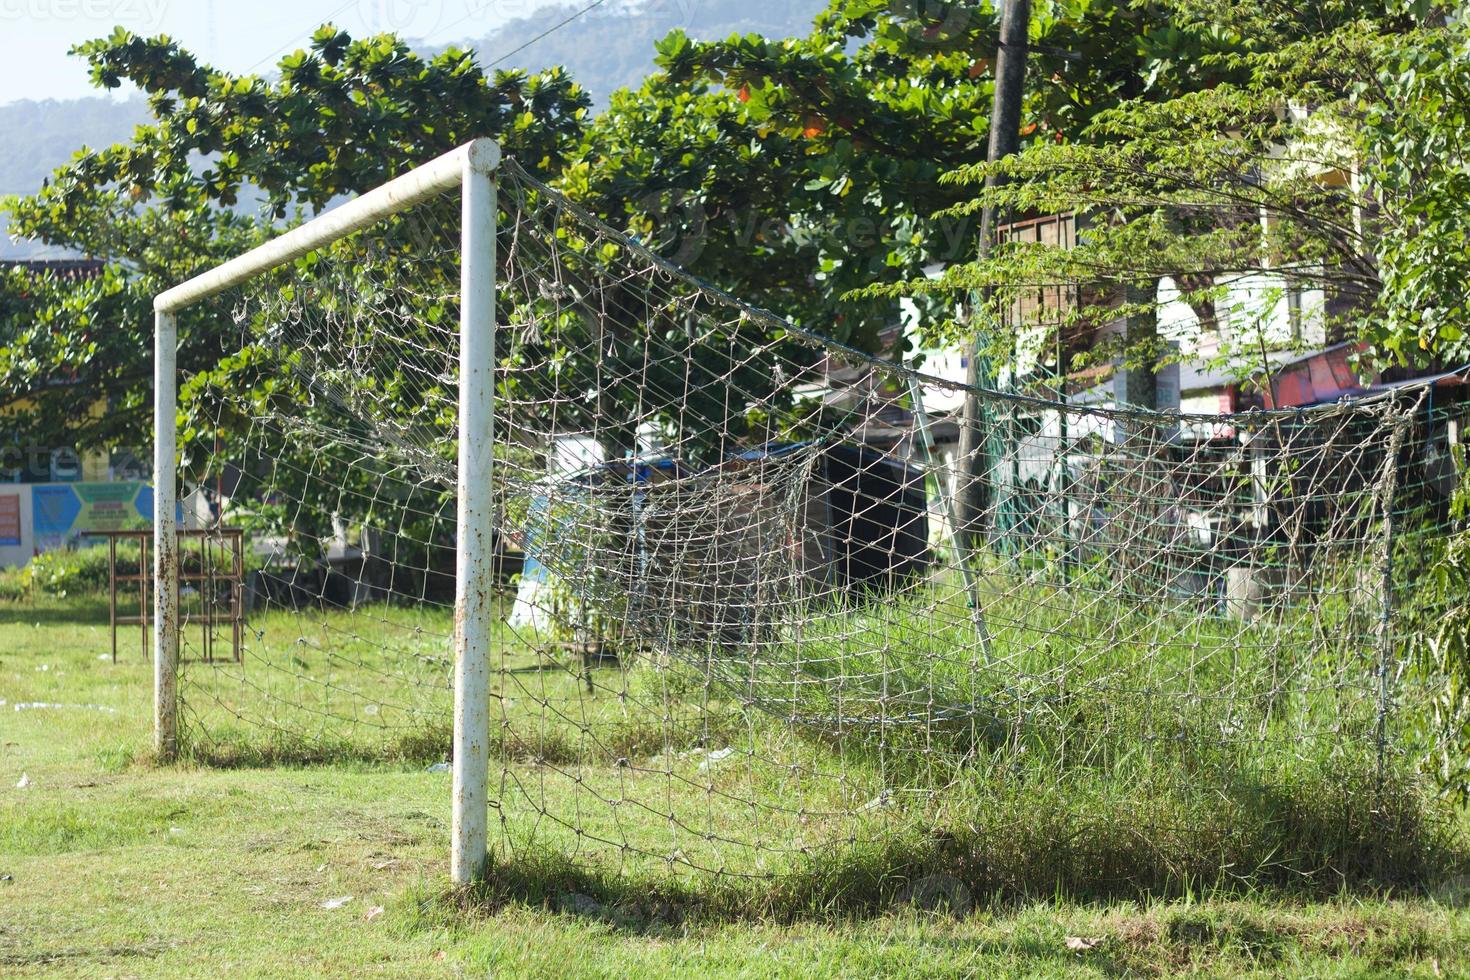 Football or soccer goal net at old grass field. photo